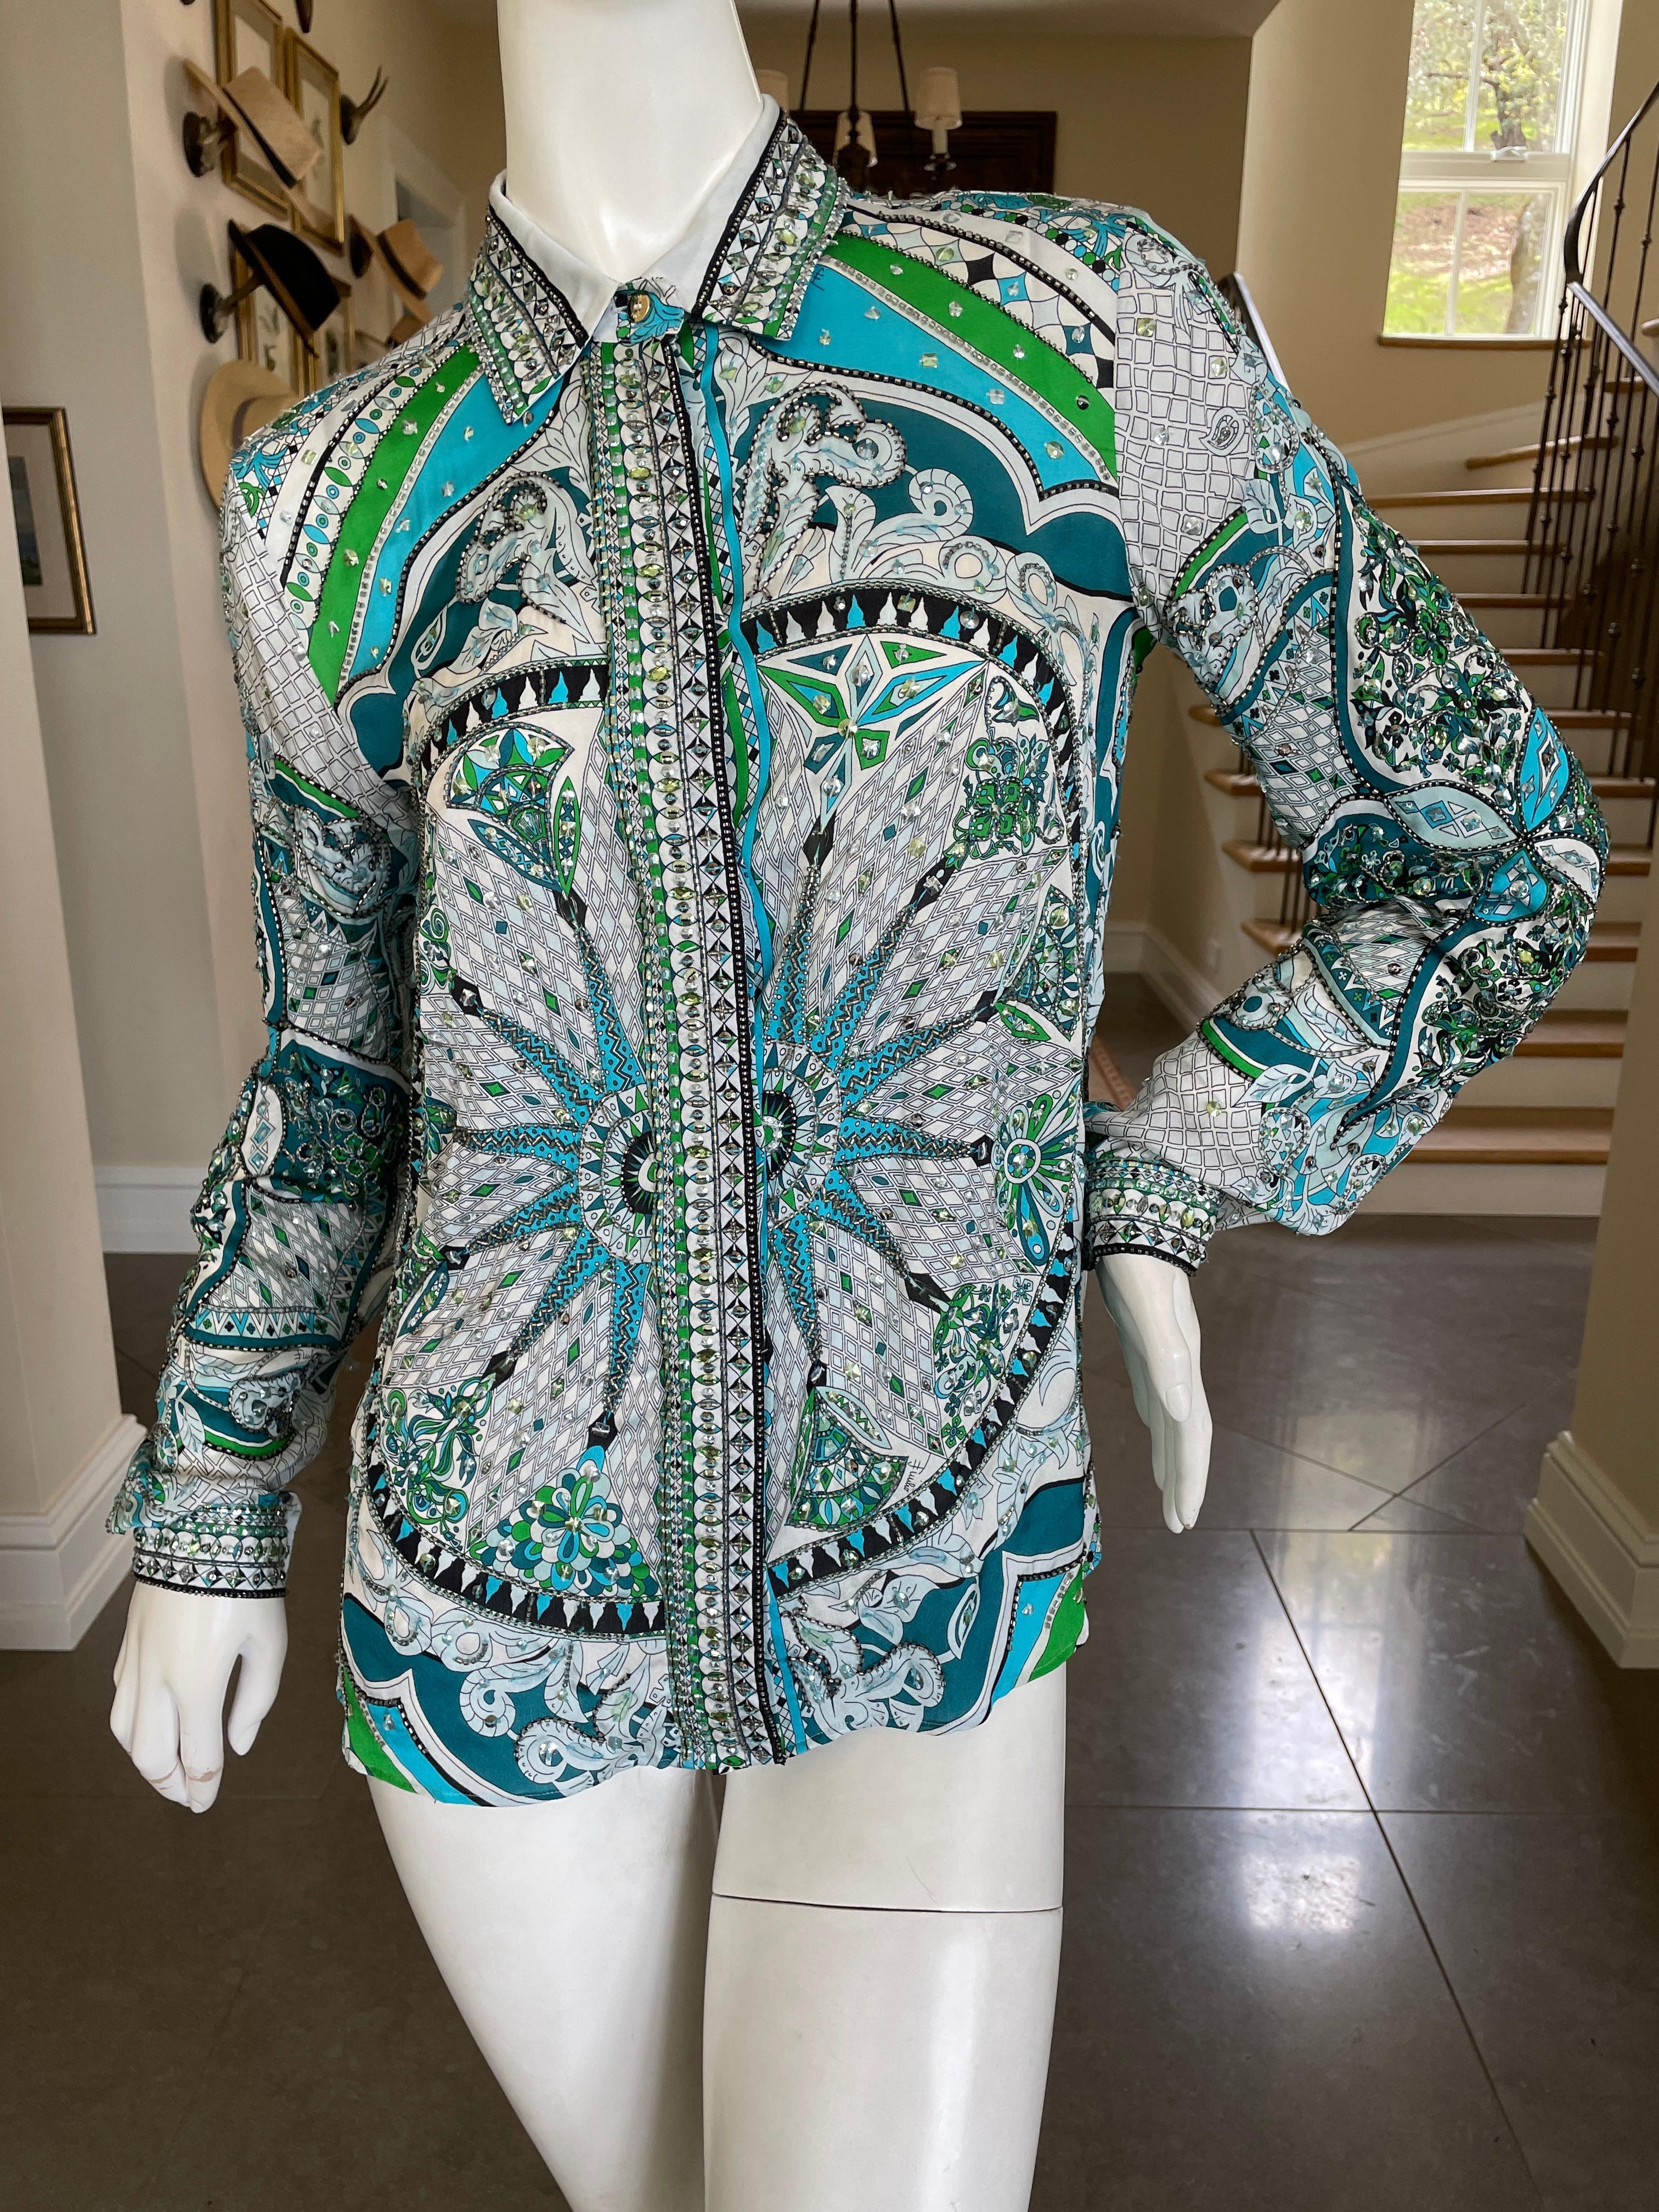 Emilio Pucci Remarkable Silk Bead and Crystal Embellished Top
WOW 
Rare to see an embellished Pucci top, this is unreal.
Will fit a man too. I am a size 42 man and it fit snugly
Size 4
Bust / Chest  36